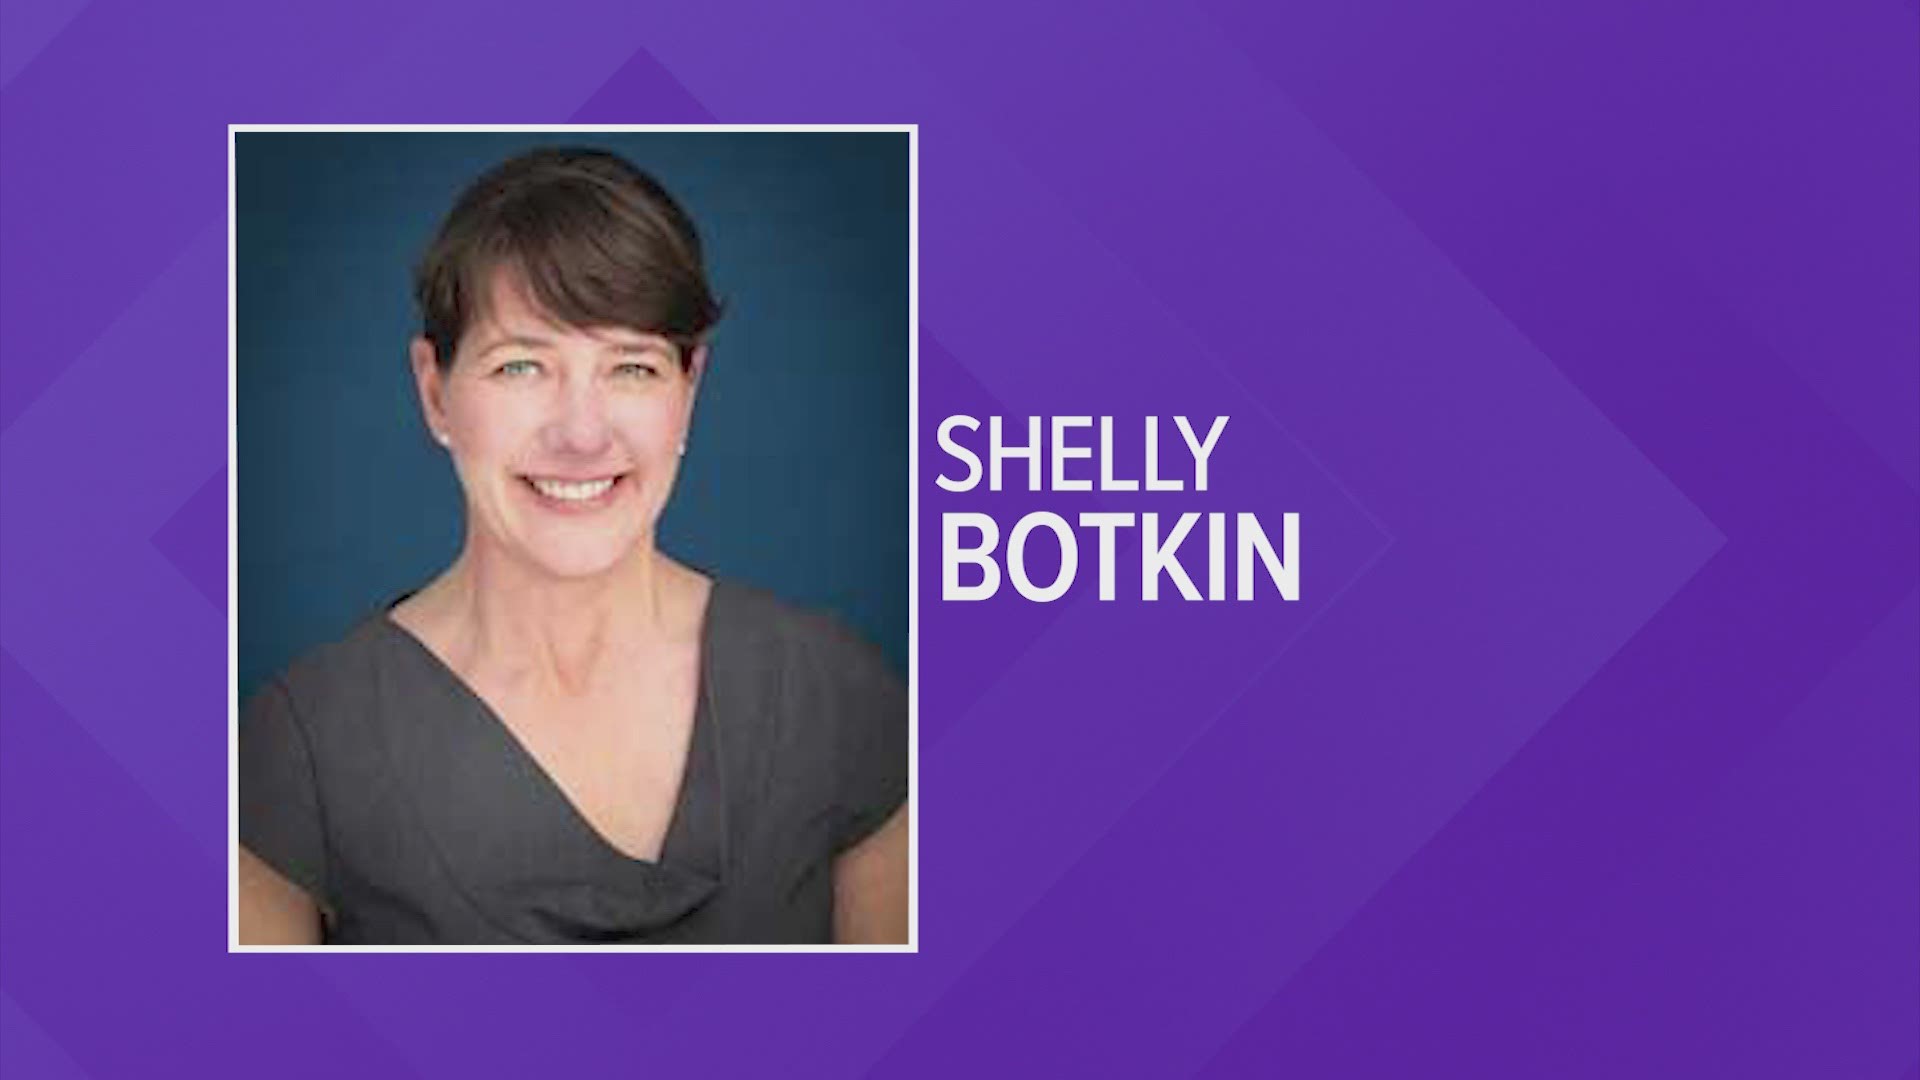 Shelly Botkin has stepped down. The PUC has a 3-member board, which now only has one member remaining.